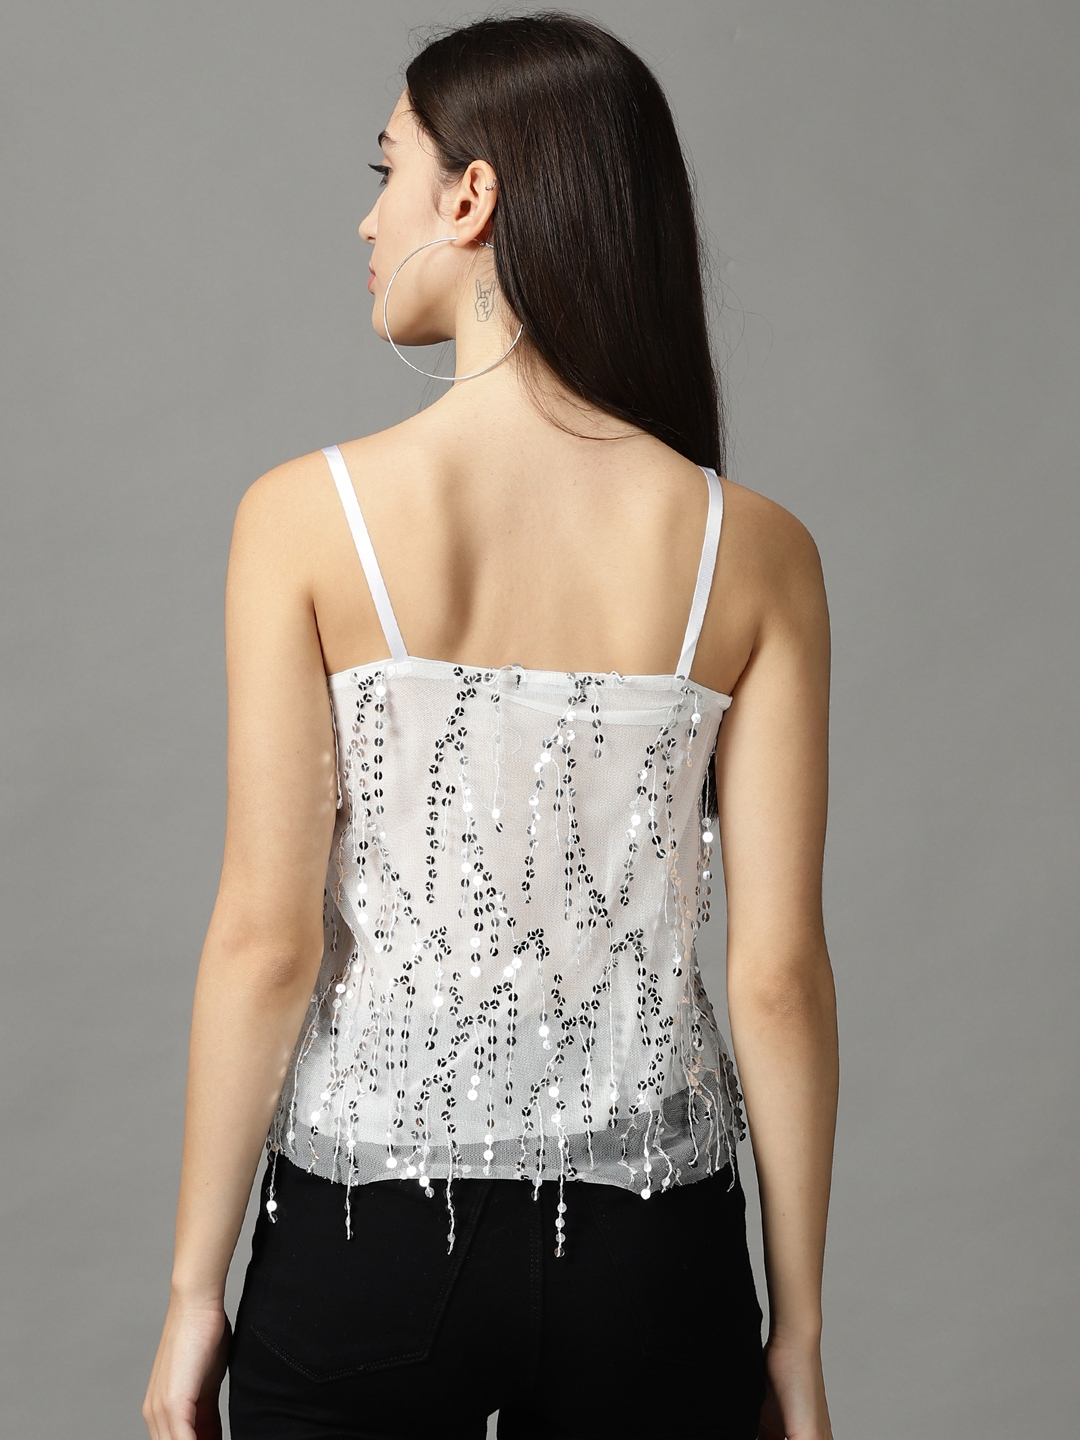 Women's White Polyester Embellished Tops